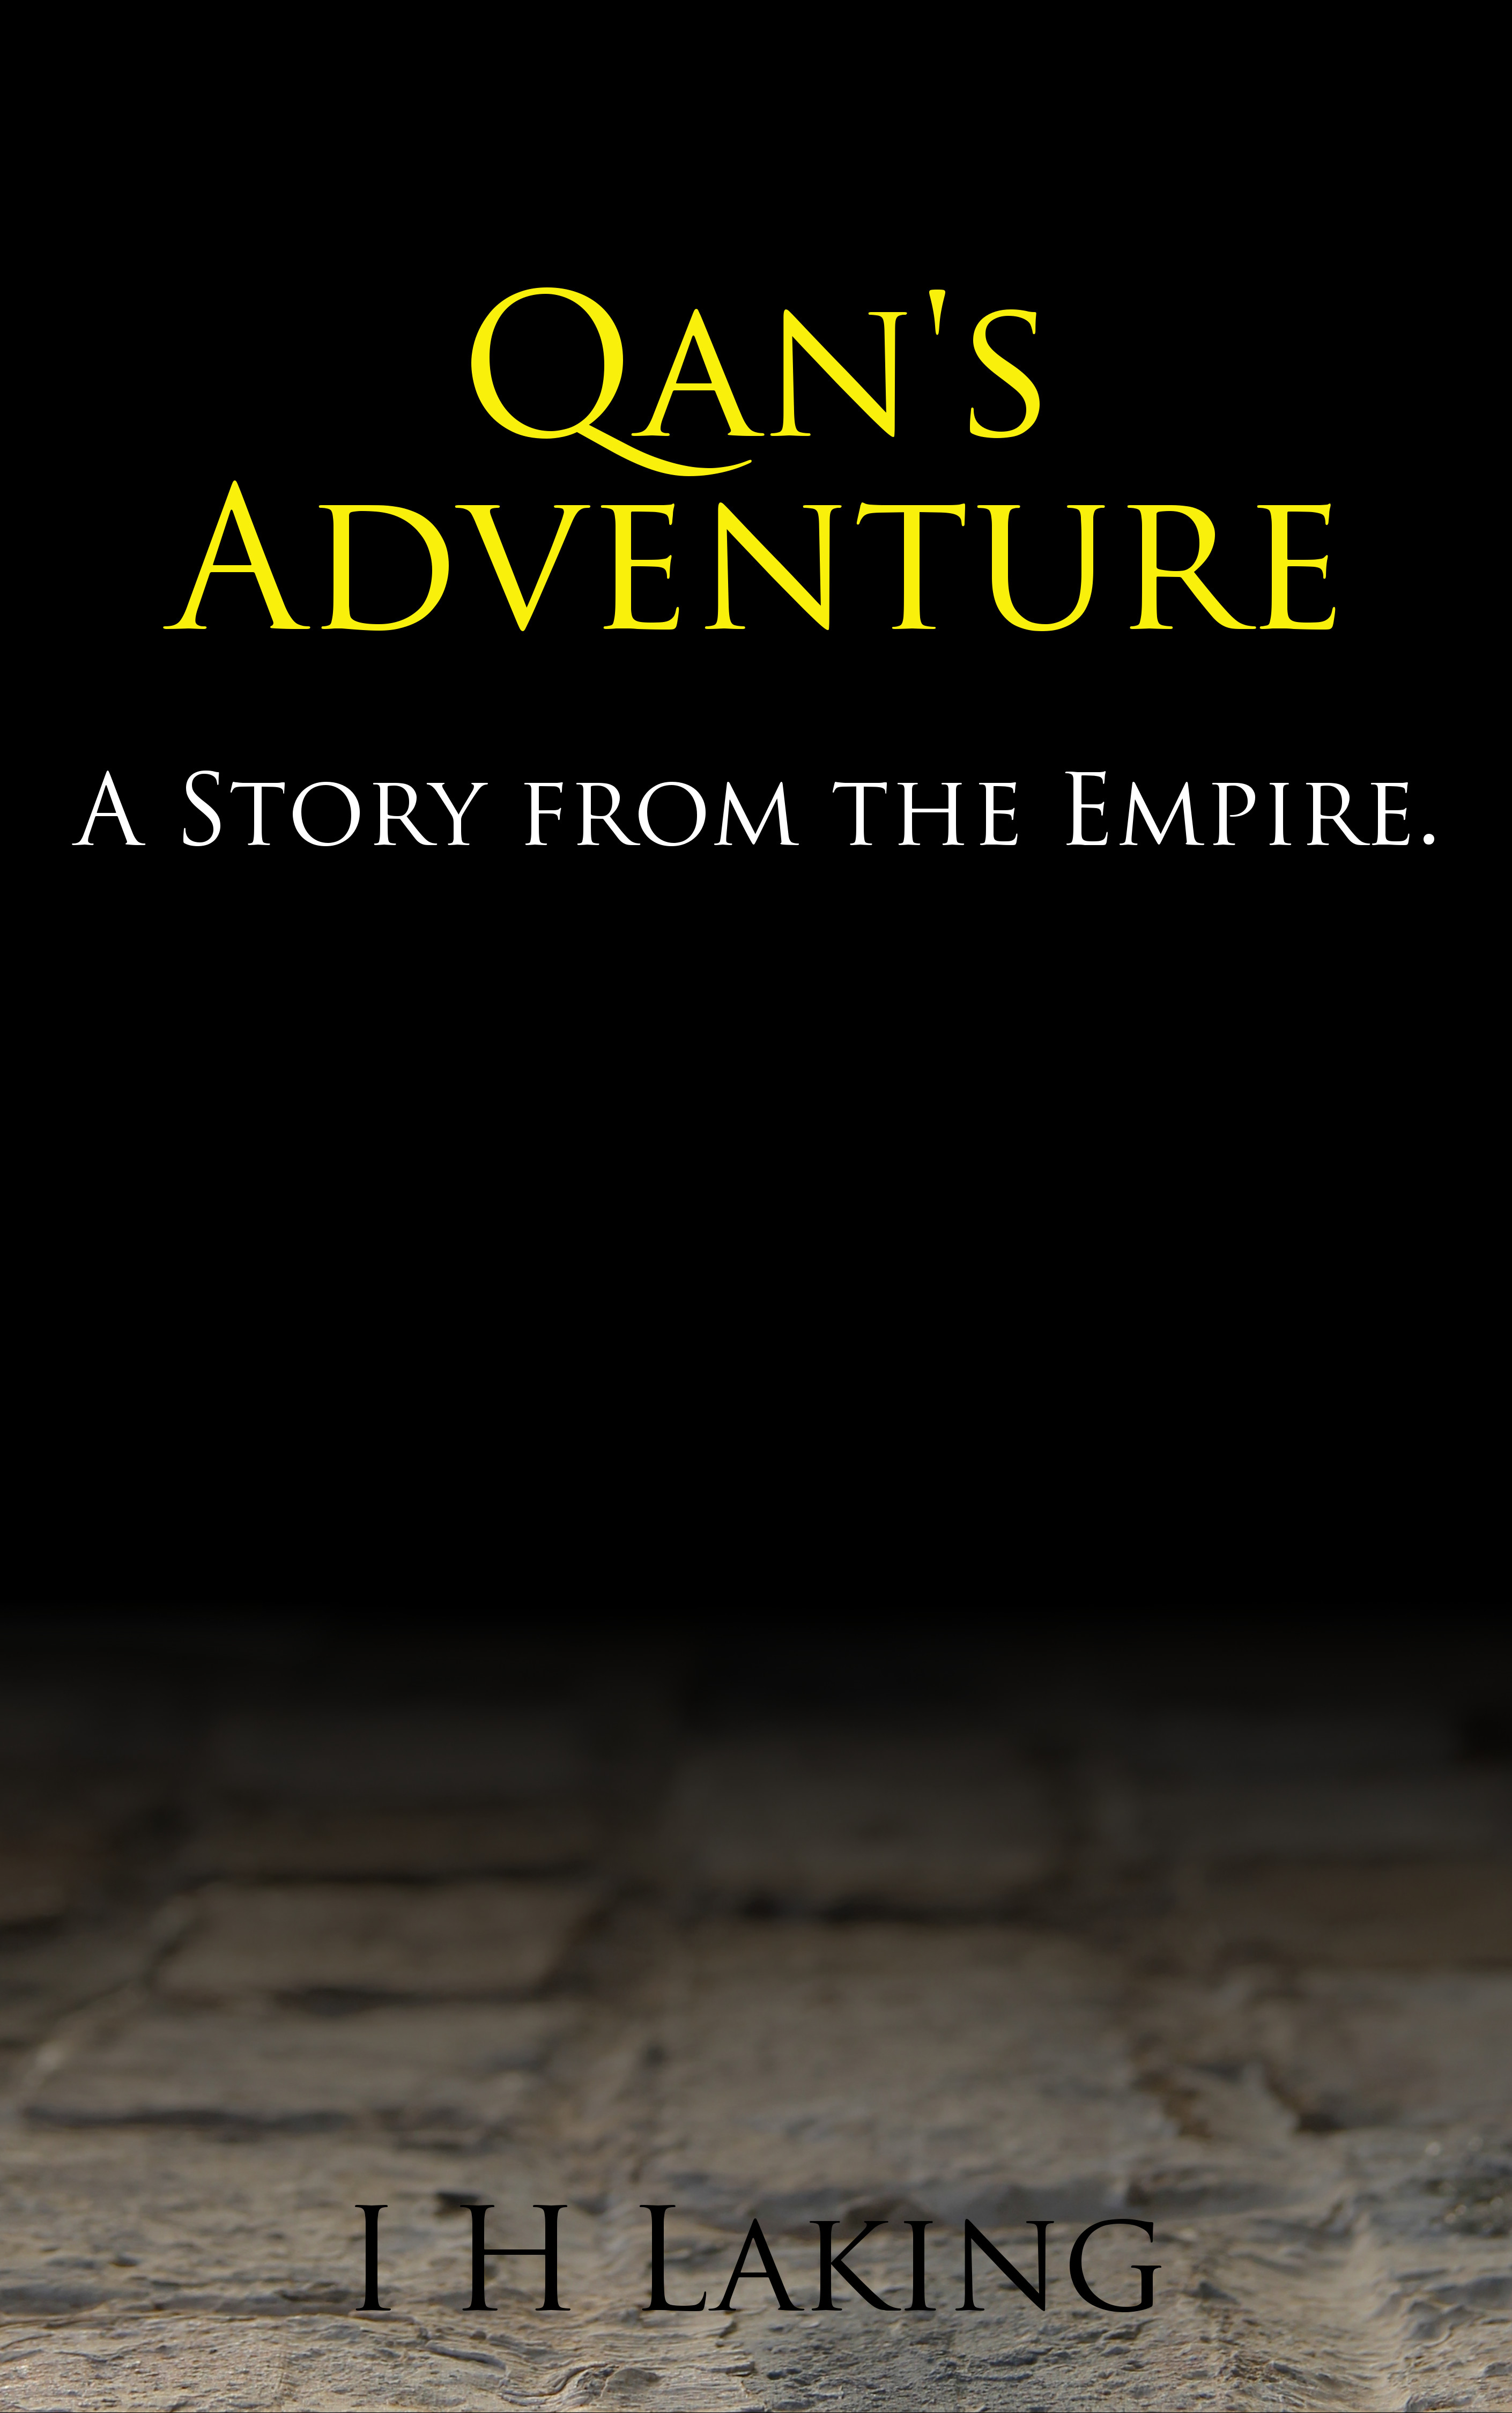 Qan's Adventure: A Story From the Empire